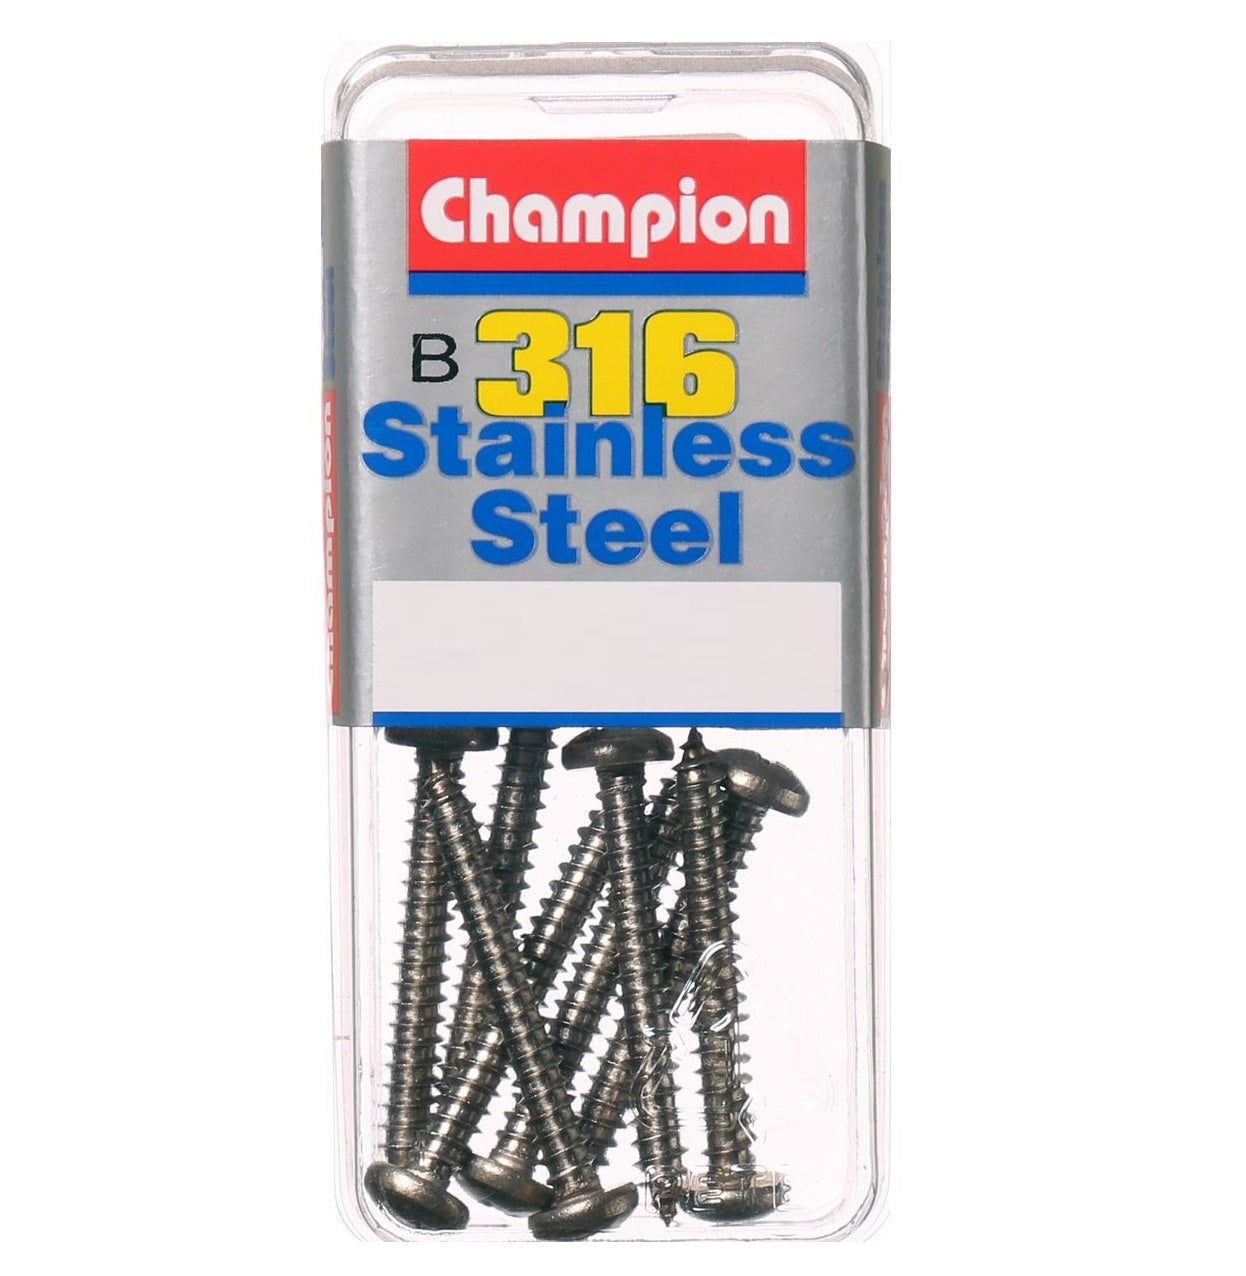 Champion Stainless Steel 316 Heavy Duty Self-Tapping Pan Head Screws - 10G